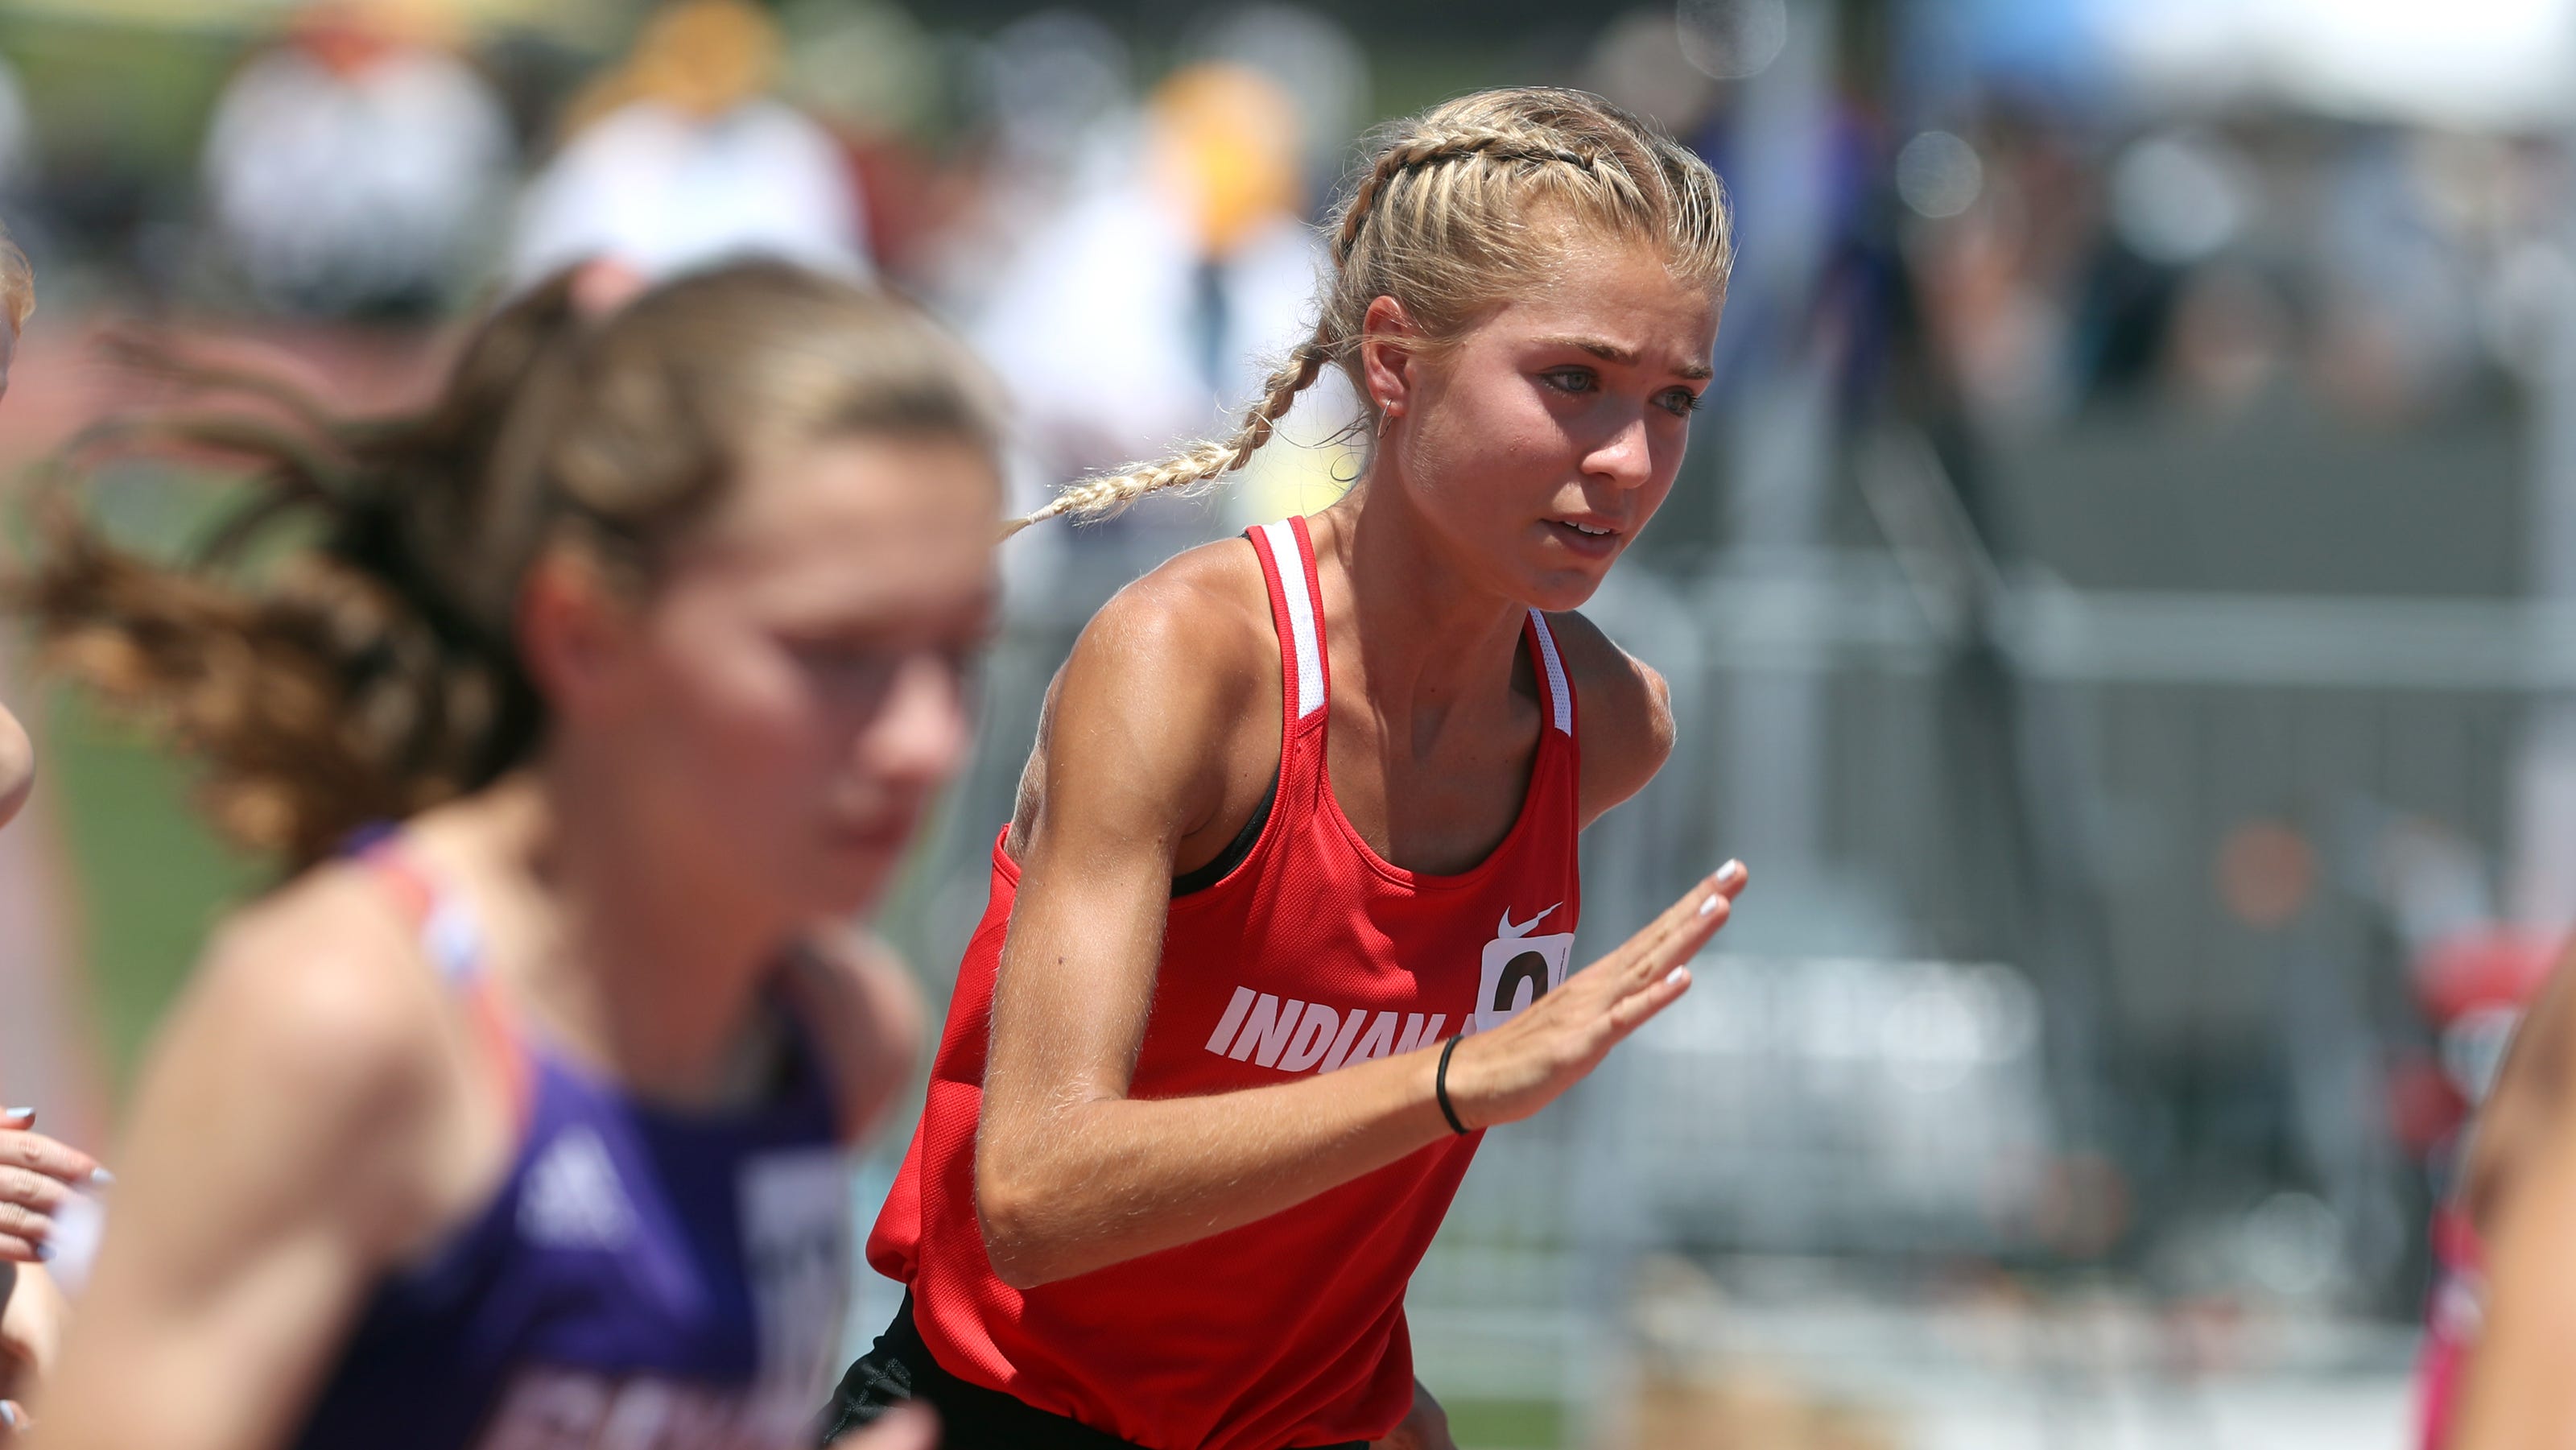 OHSAA state track meet sees local athletes excel